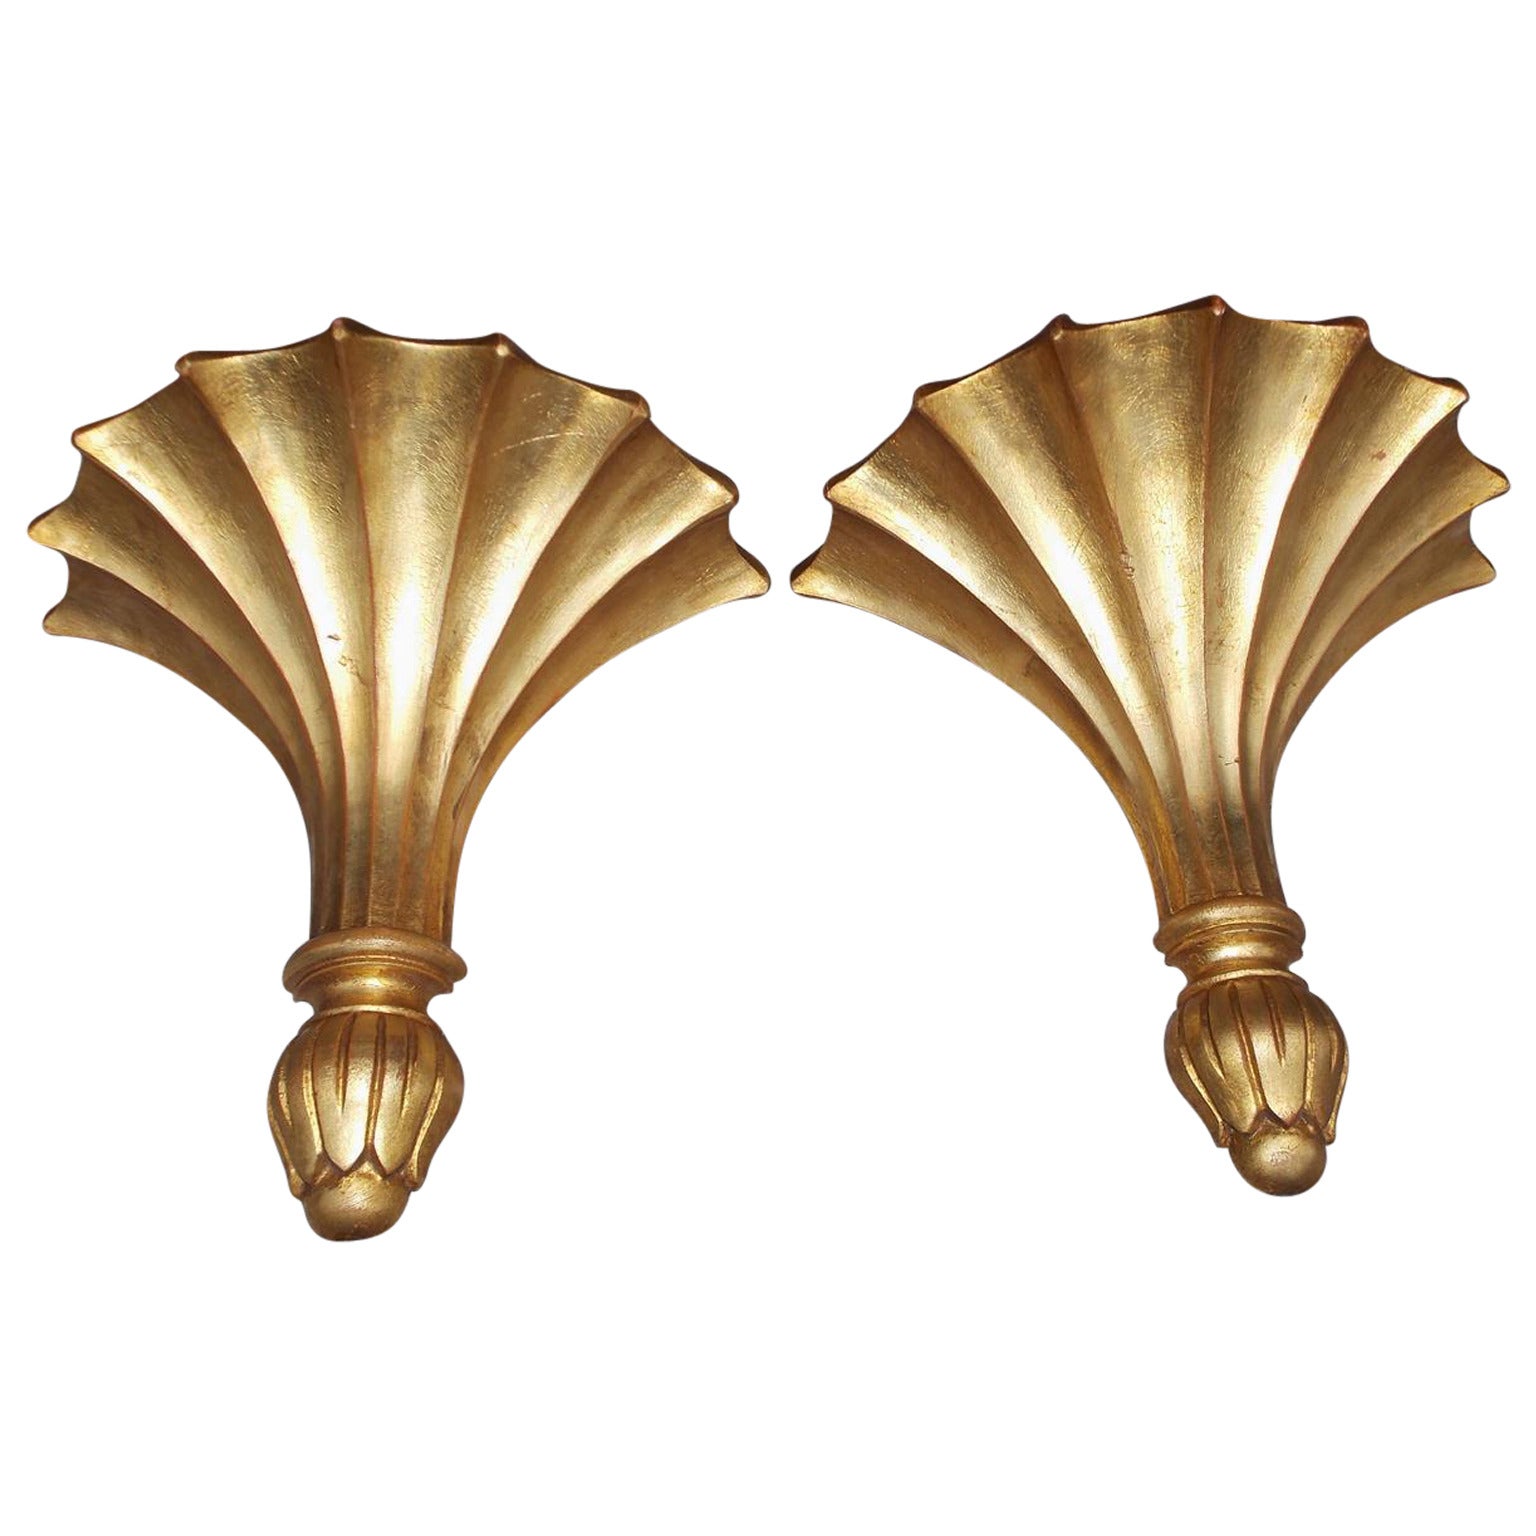 Pair of English Carved Wood and Gilt Wall Brackets, Circa 1830